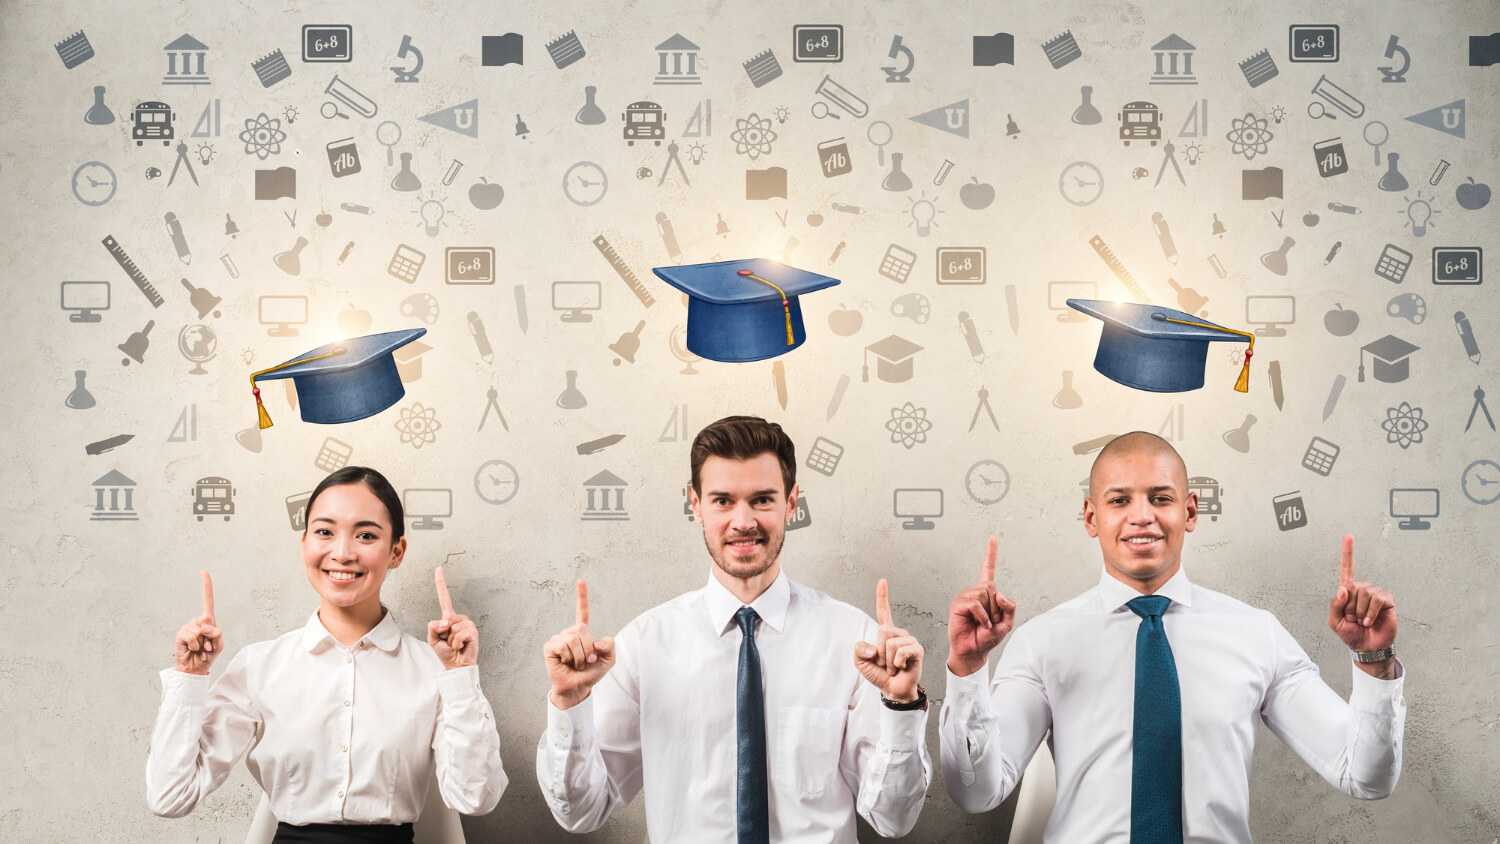 Which Jobs Should You Aim For as a Recent Graduate?